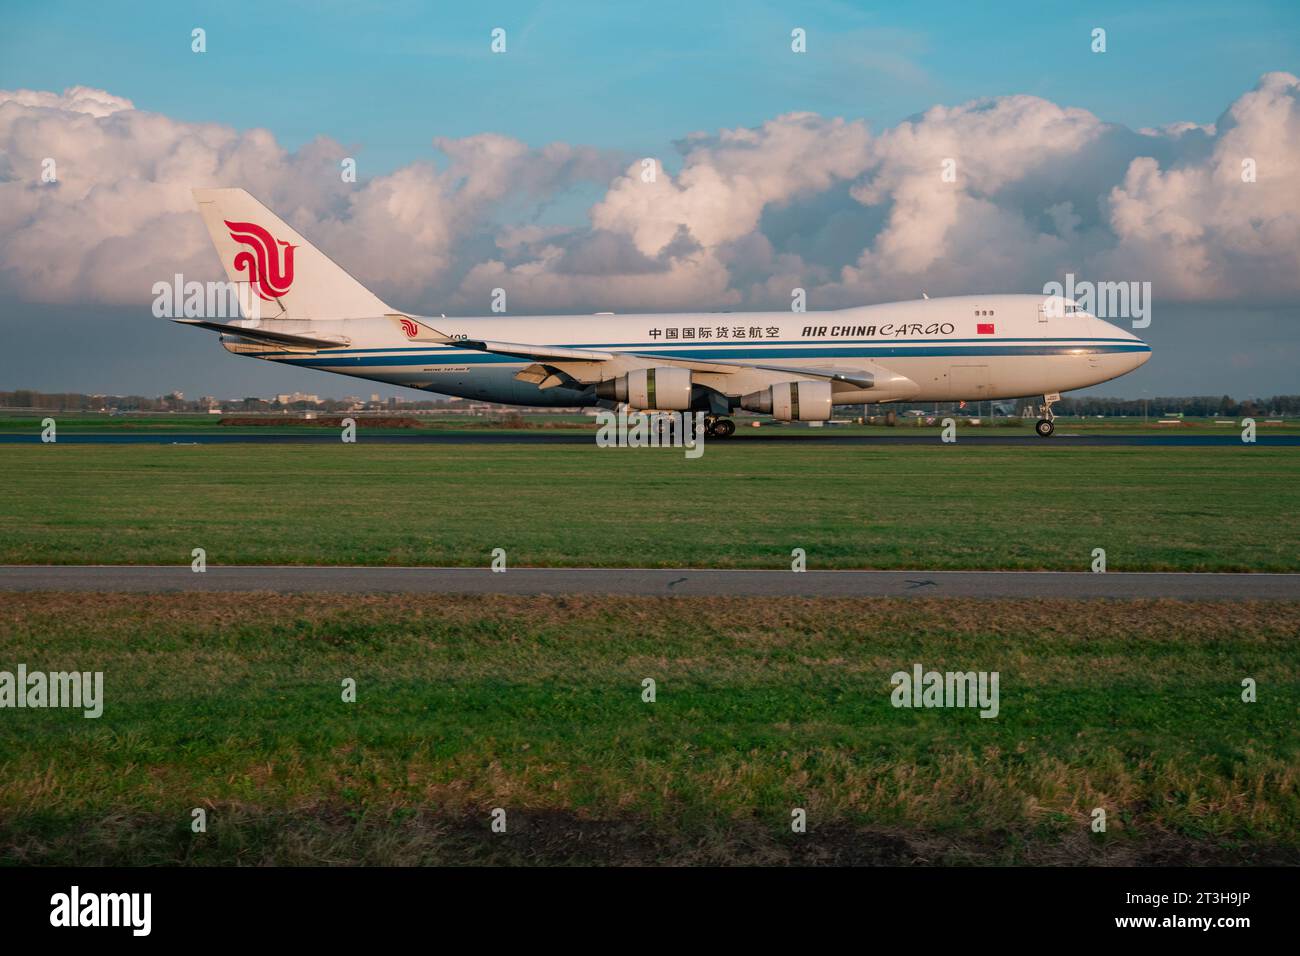 an Air China Cargo Boeing 747 cargo plane lands at Amsterdam Schiphol airport in evening light Stock Photo